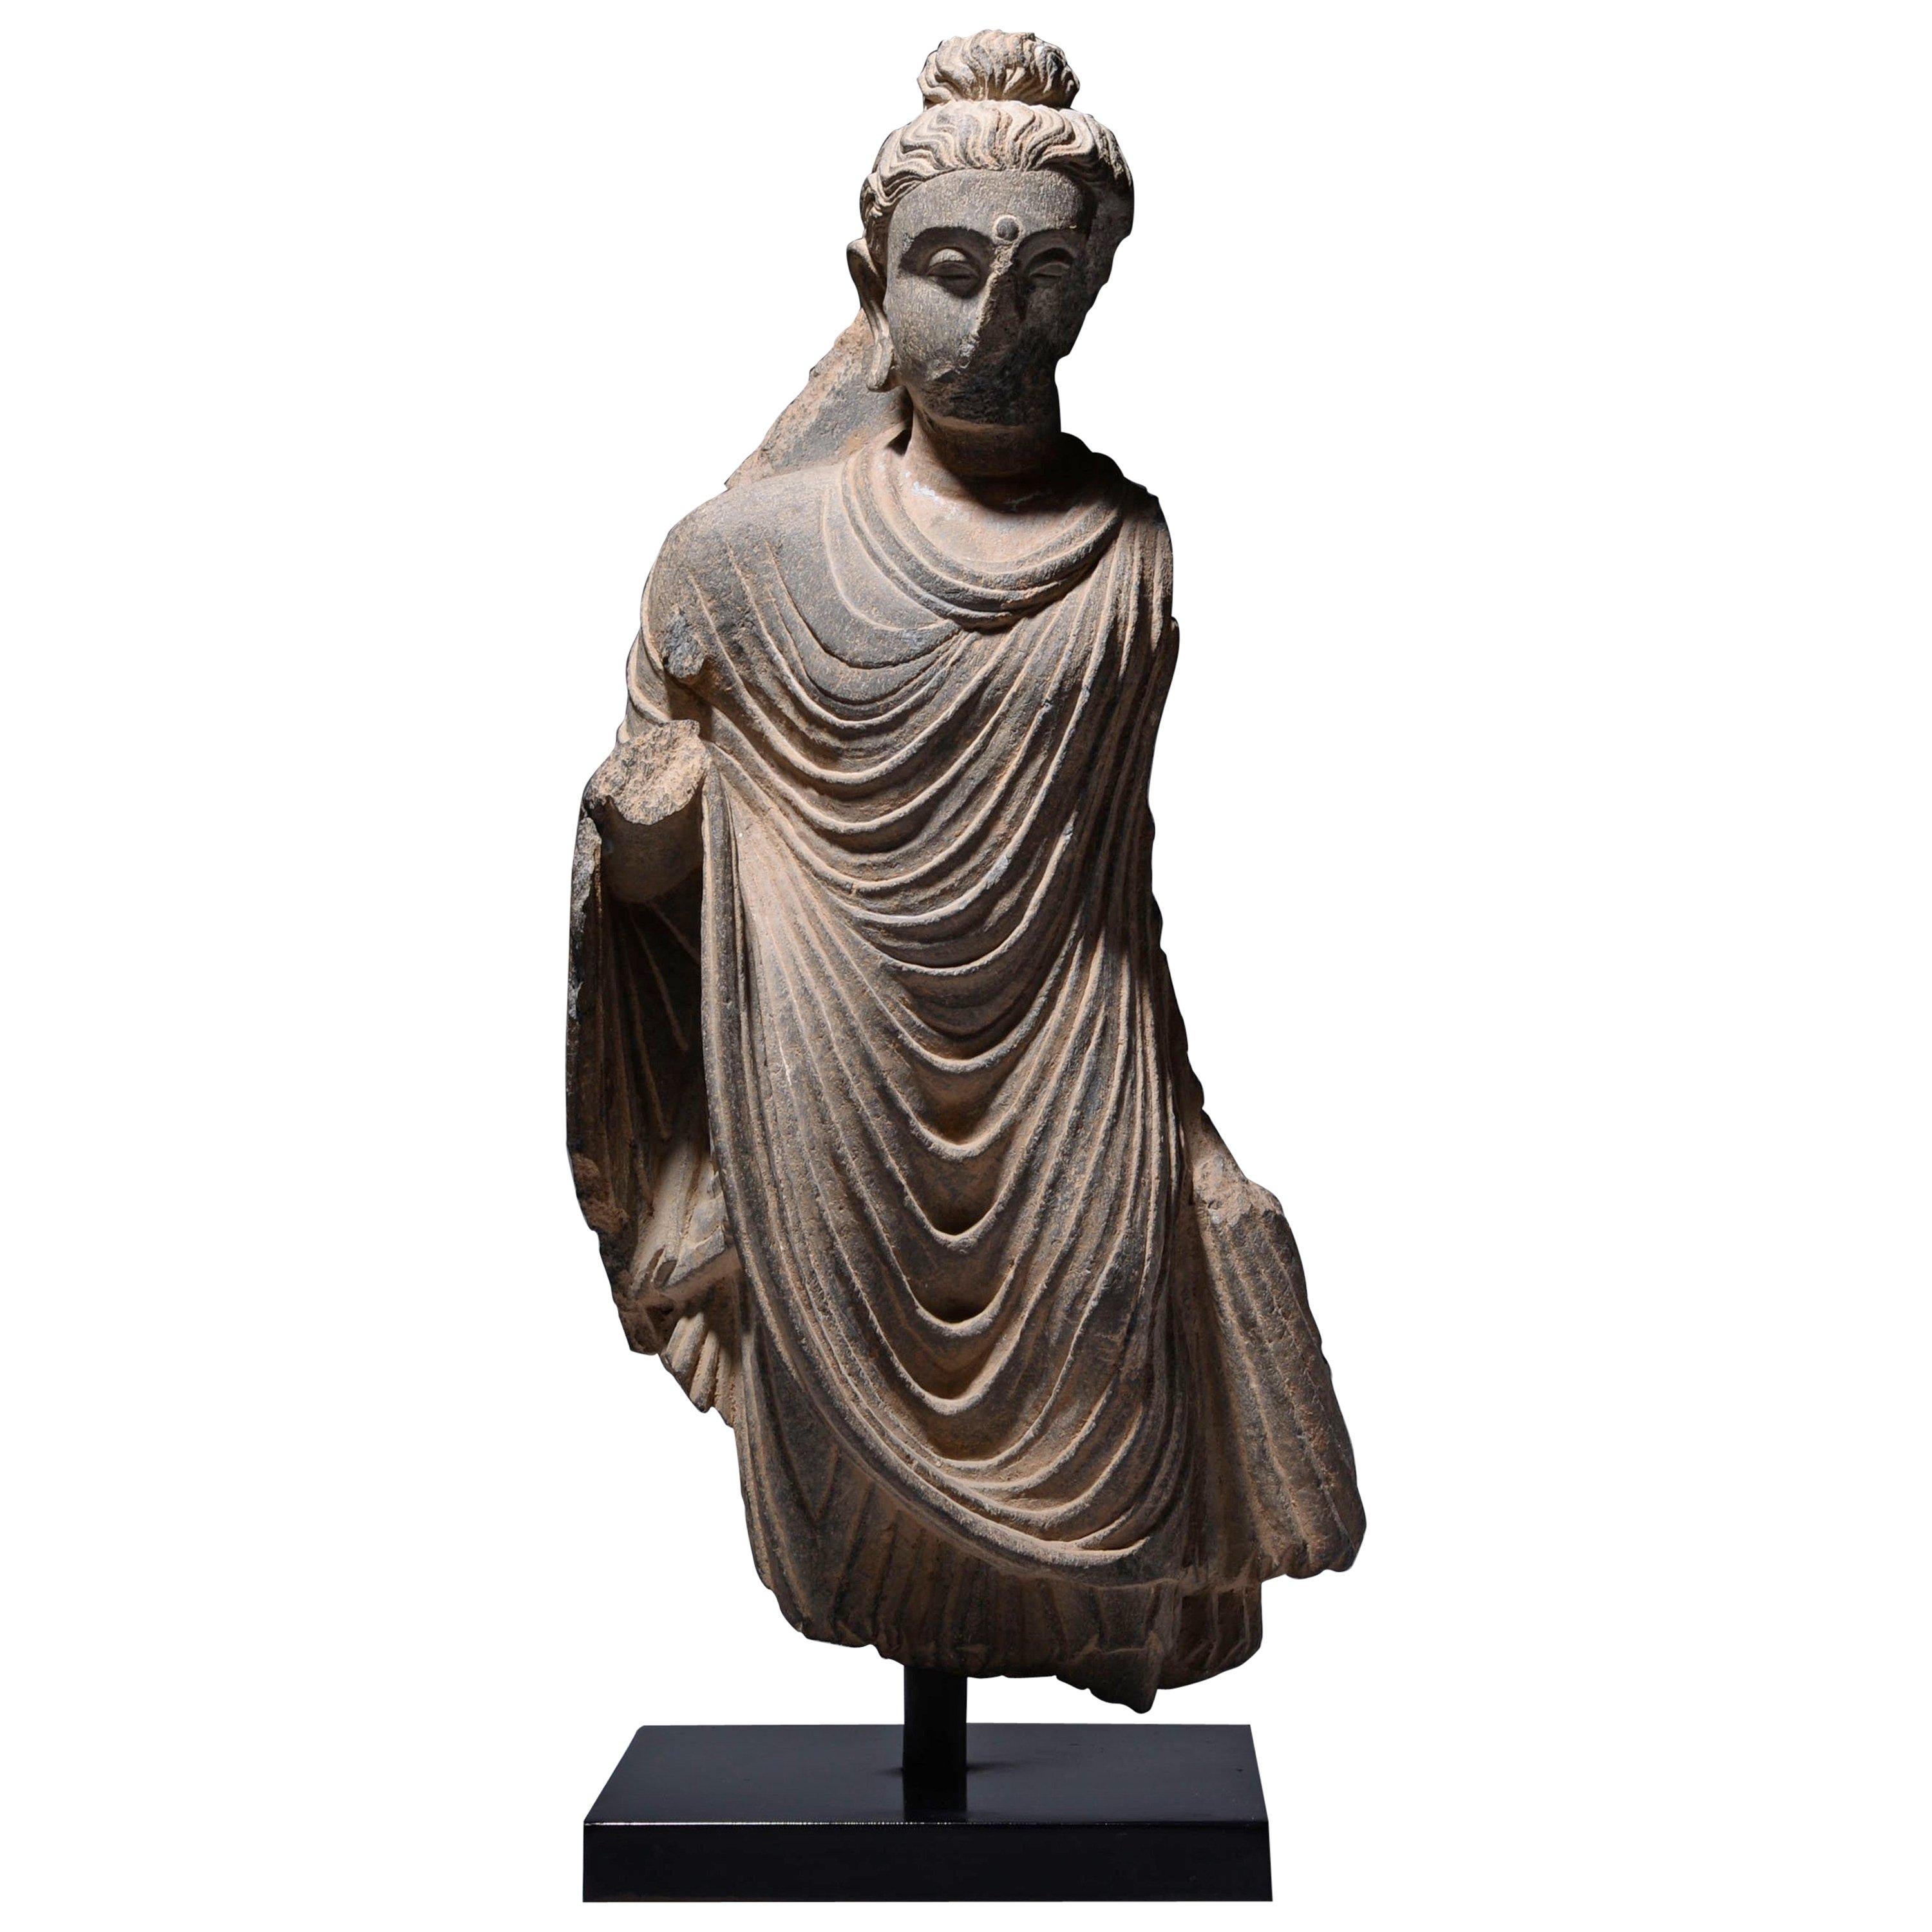 Gandharan Schist Buddha
Circa 3rd Century A.D.

This finely carved stone statue depicts the Buddha, clad in cascading folds of fabric, clinging lightly to the contours of his body; particular attention has been given to the hair and face, and his